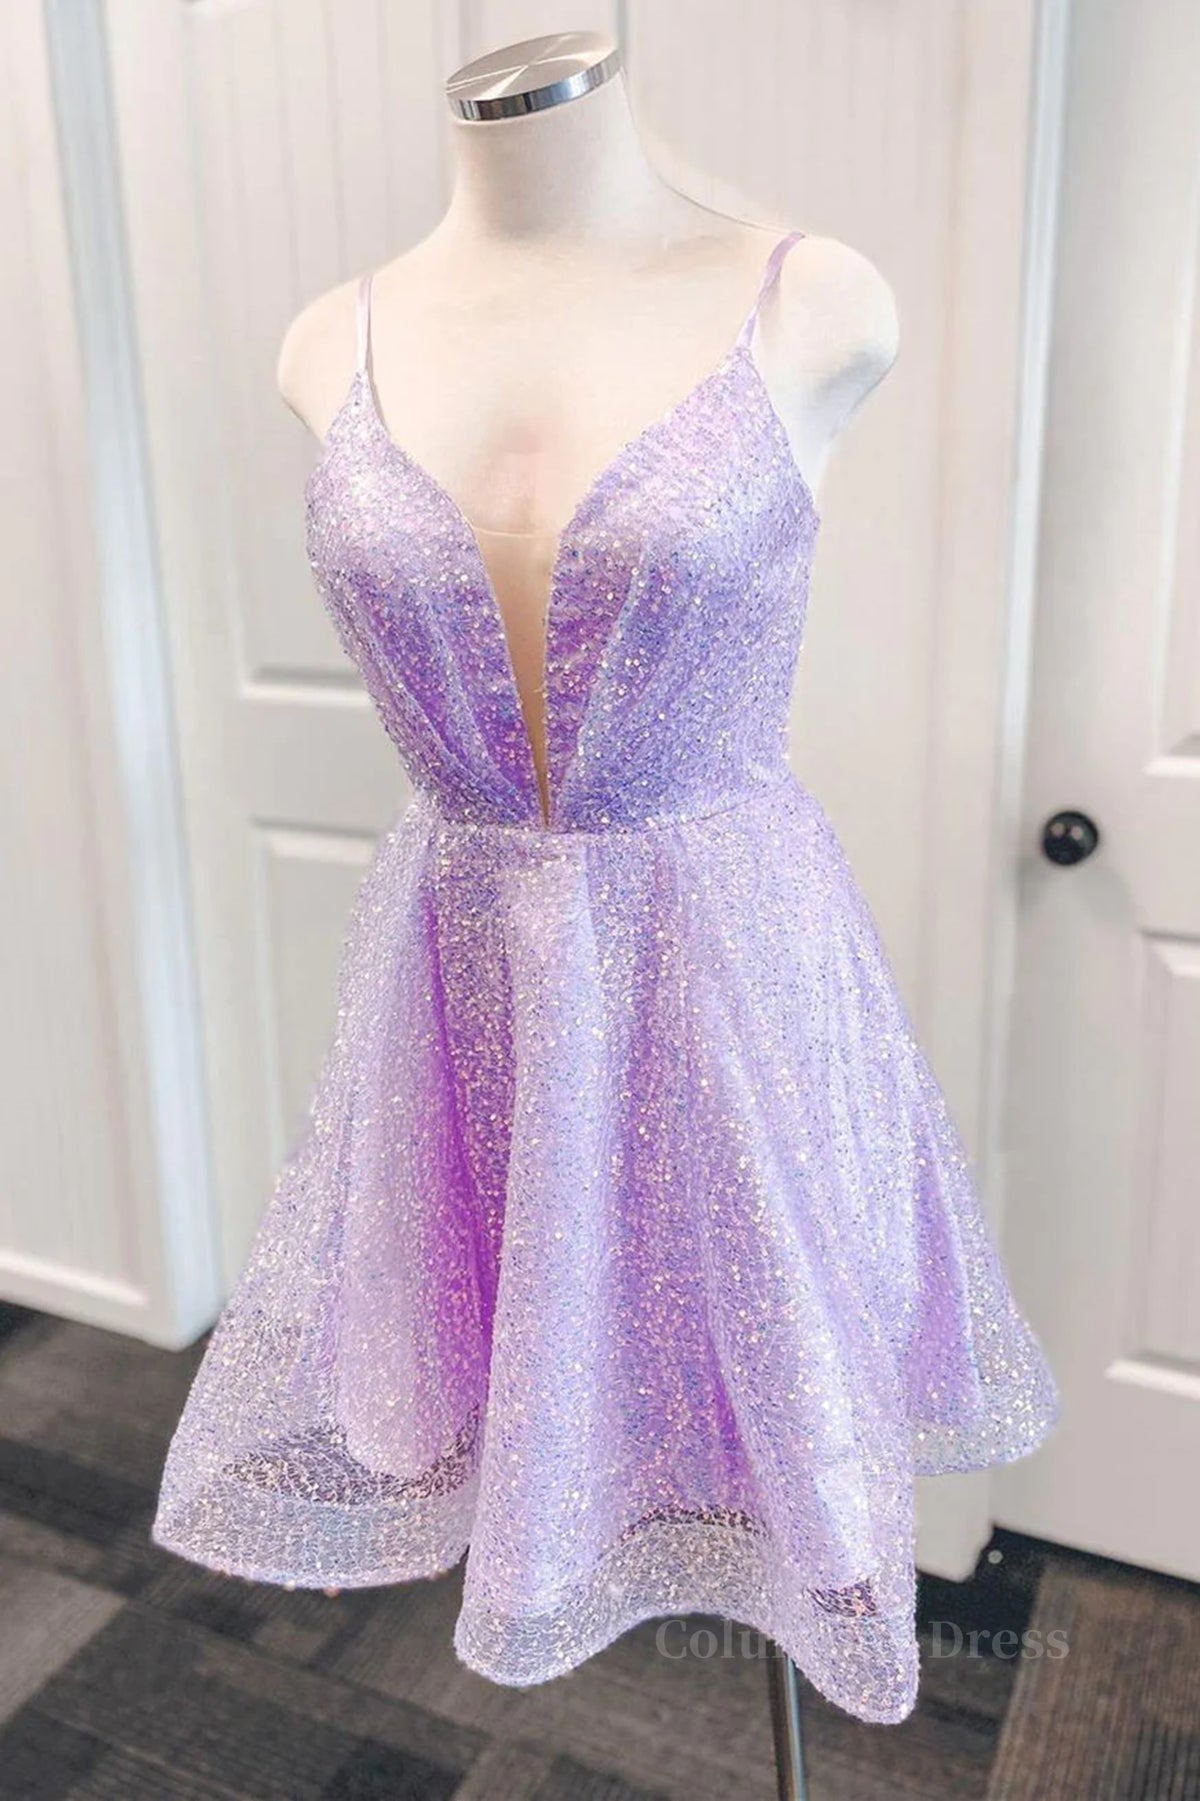 V Neck Short Purple Corset Prom Dresses, Short V Neck Purple Corset Formal Corset Homecoming Dresses outfit, Evening Dresses With Sleeves